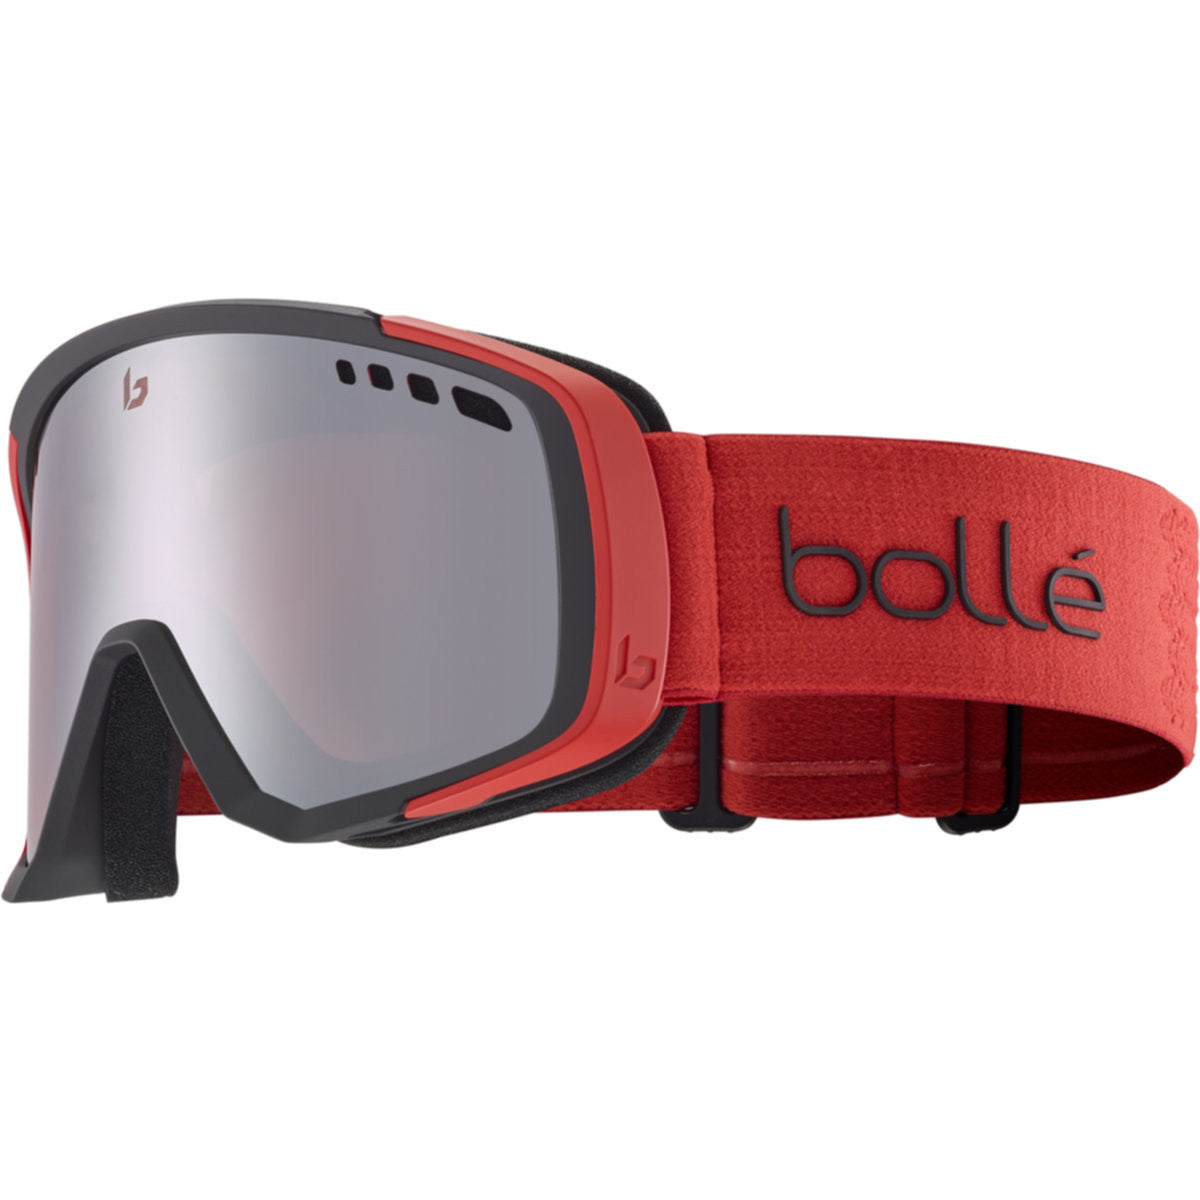 Bolle Mammoth Goggles  Black Red Matte Large